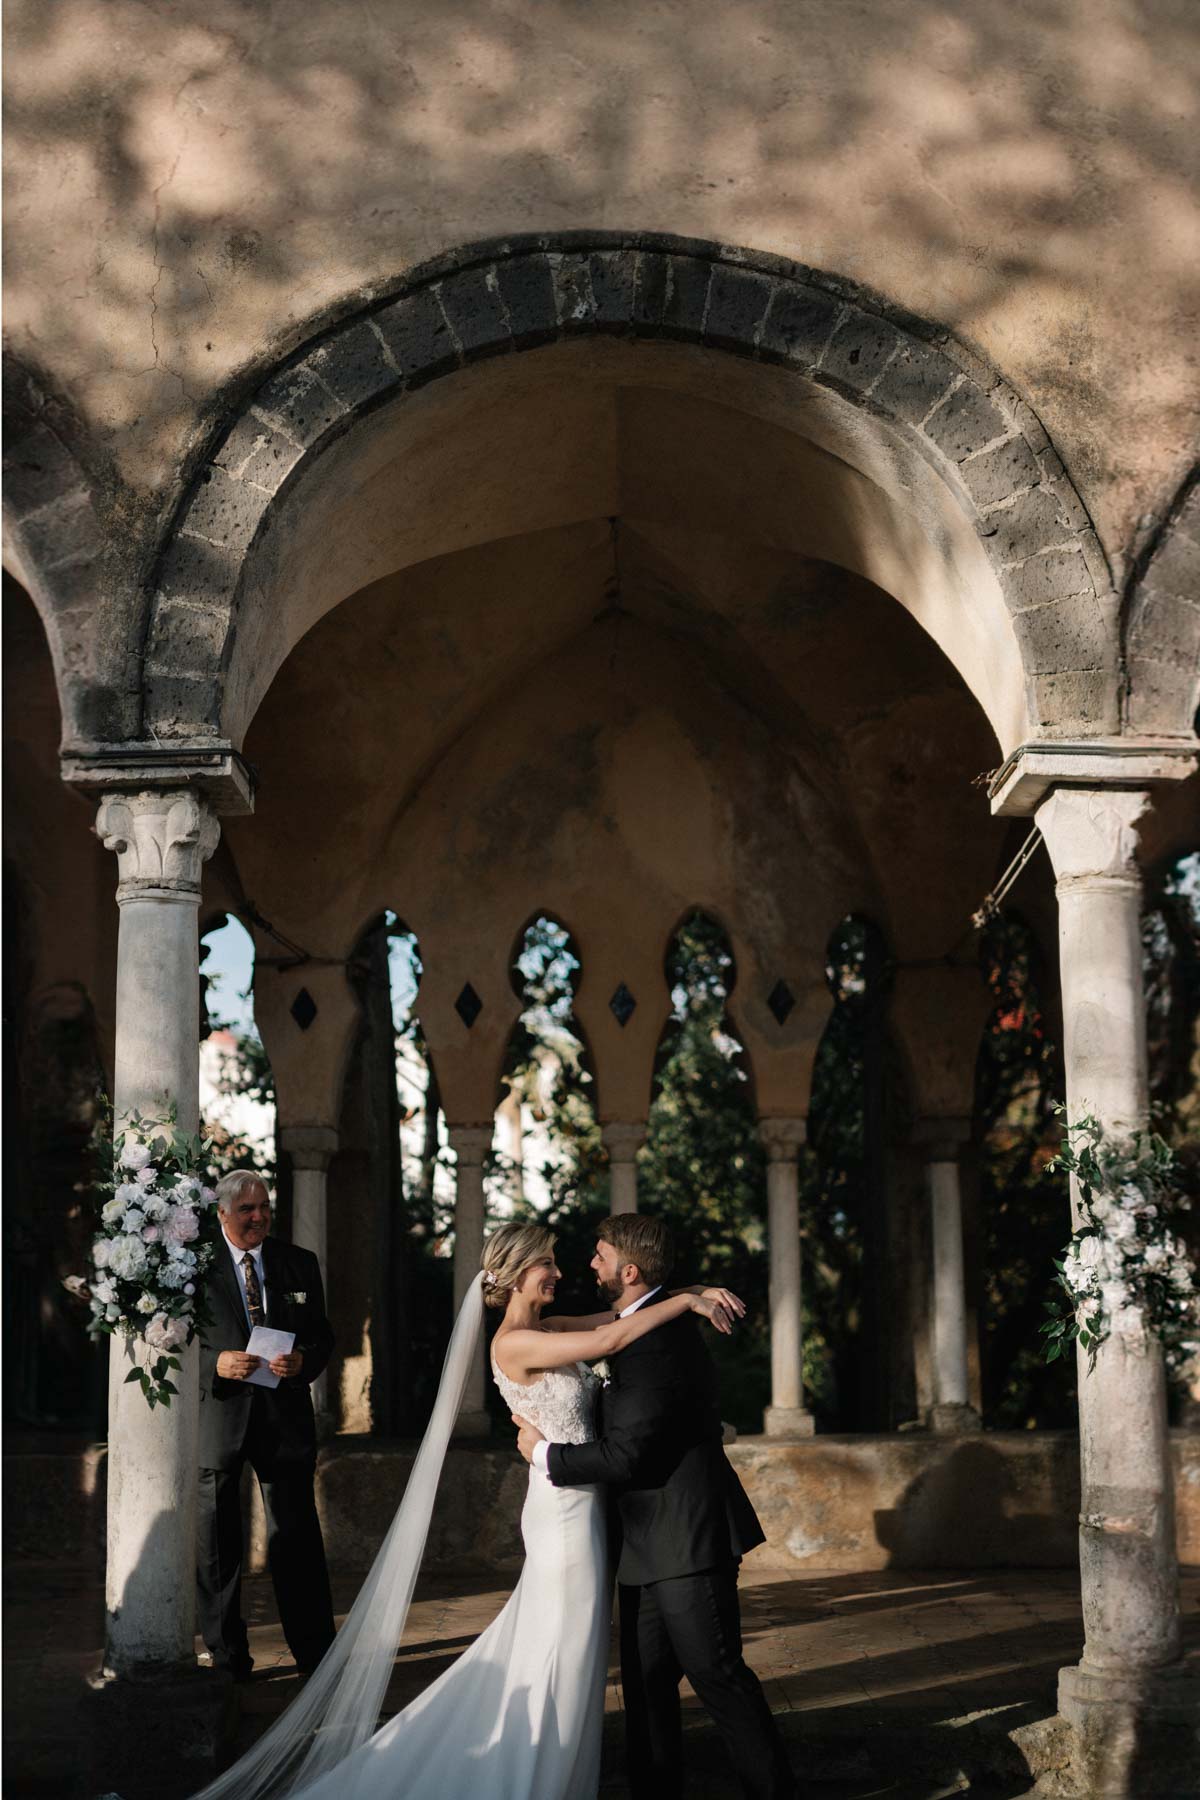 Melanie and Ruben share a tender embrace under the ancient arches during their Villa Cimbrone wedding, with soft light filtering through gothic windows and the officiant smiling warmly